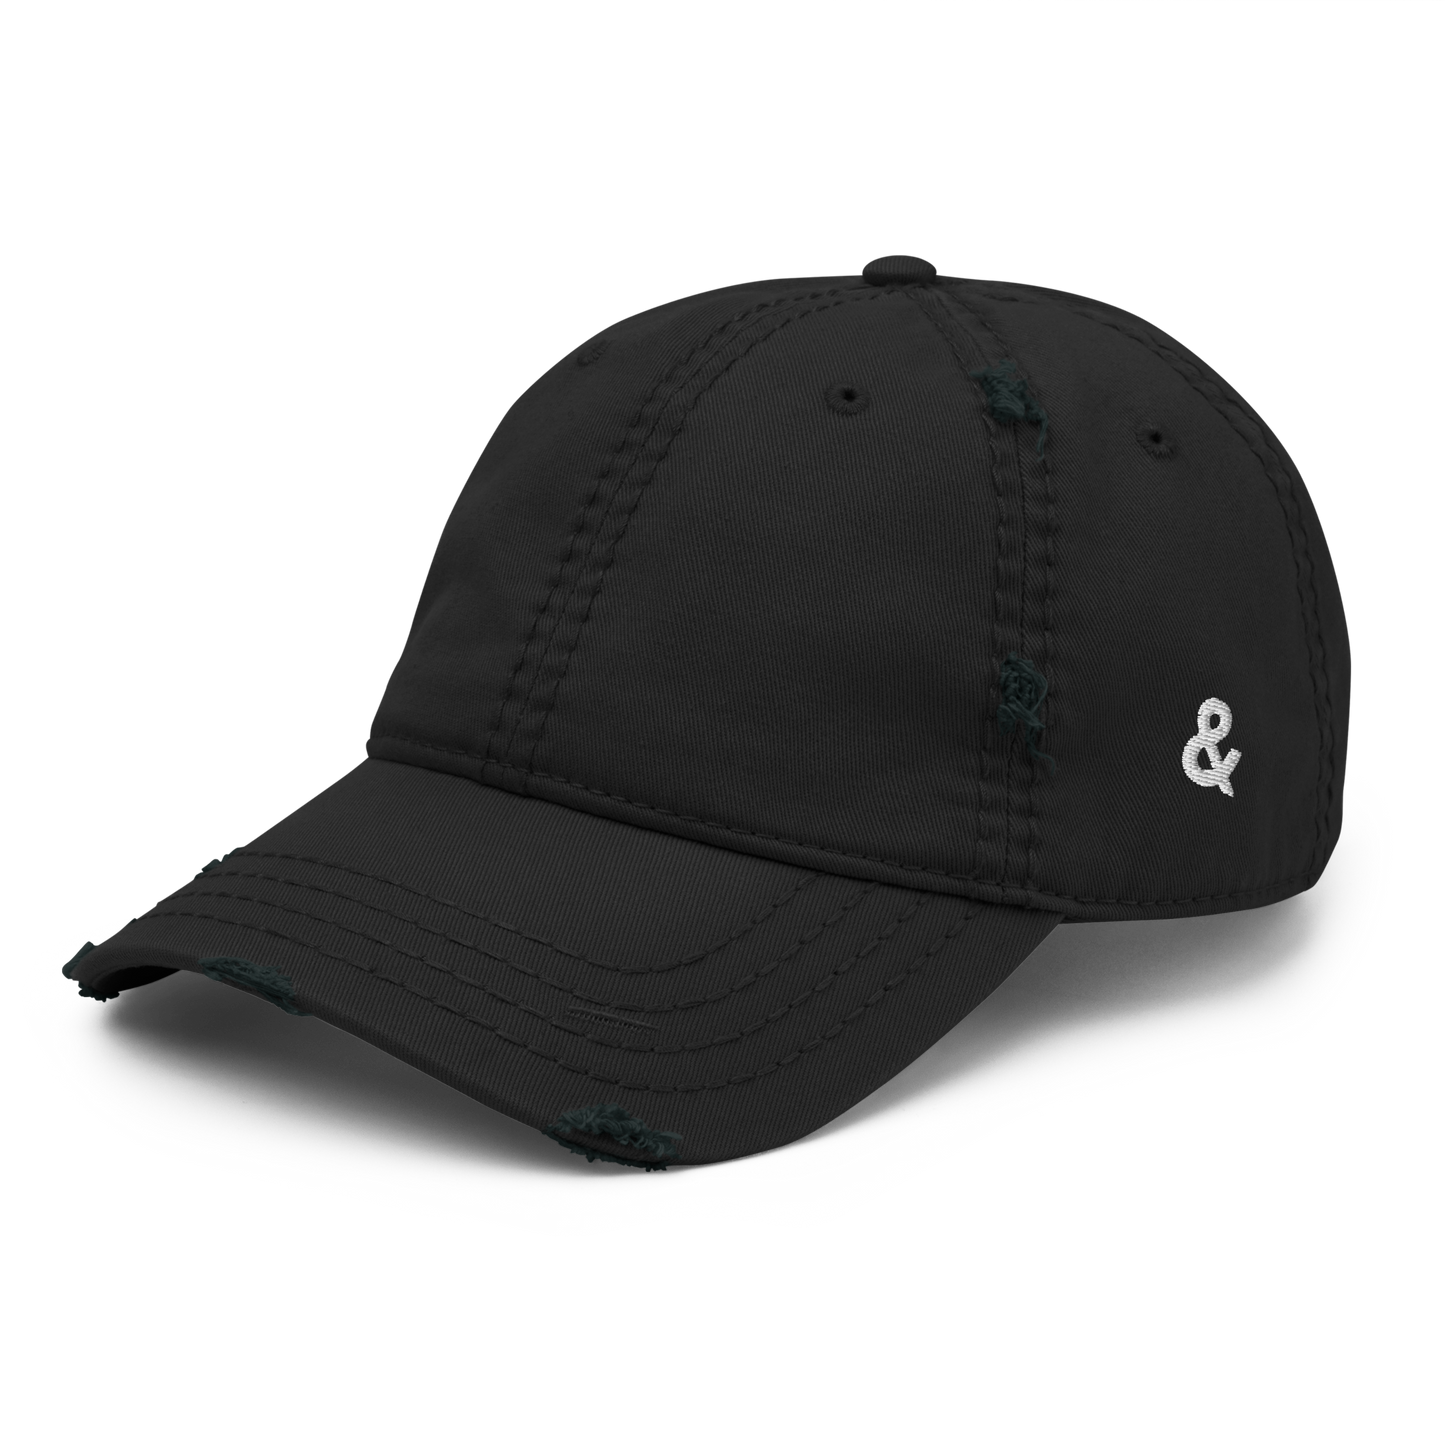 Embroidered "Ampersand" Distressed Cap